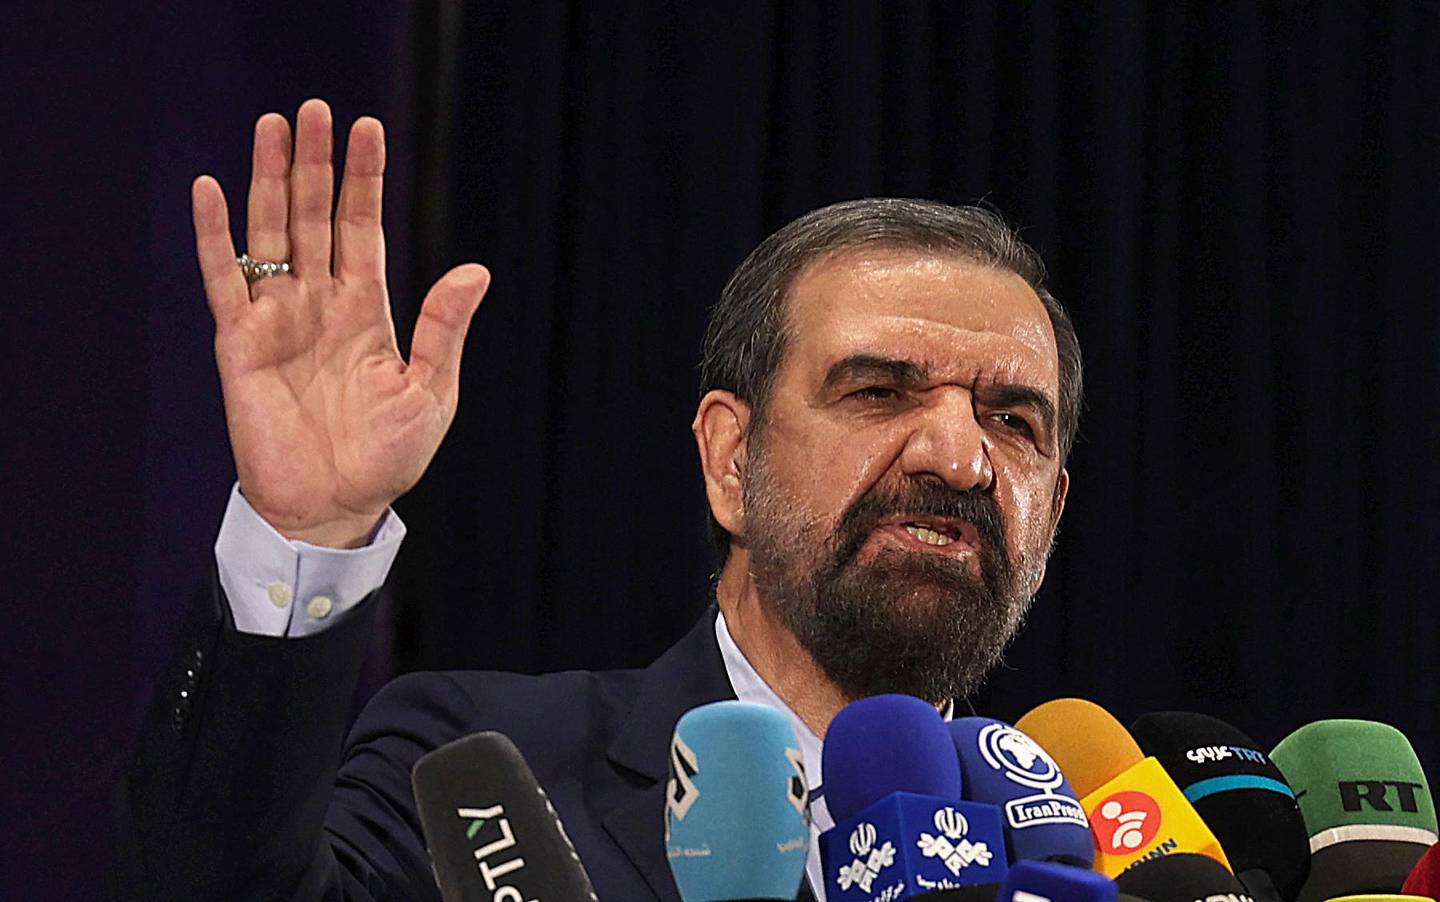 Iranian former chief of the Revolutionary Guards Mohsen Rezai talks to the media after registering his candidacy for the June presidential elections, at the Interior Ministry in the capital Tehran, on May 15, 2021. (Photo by ATTA KENARE / AFP)